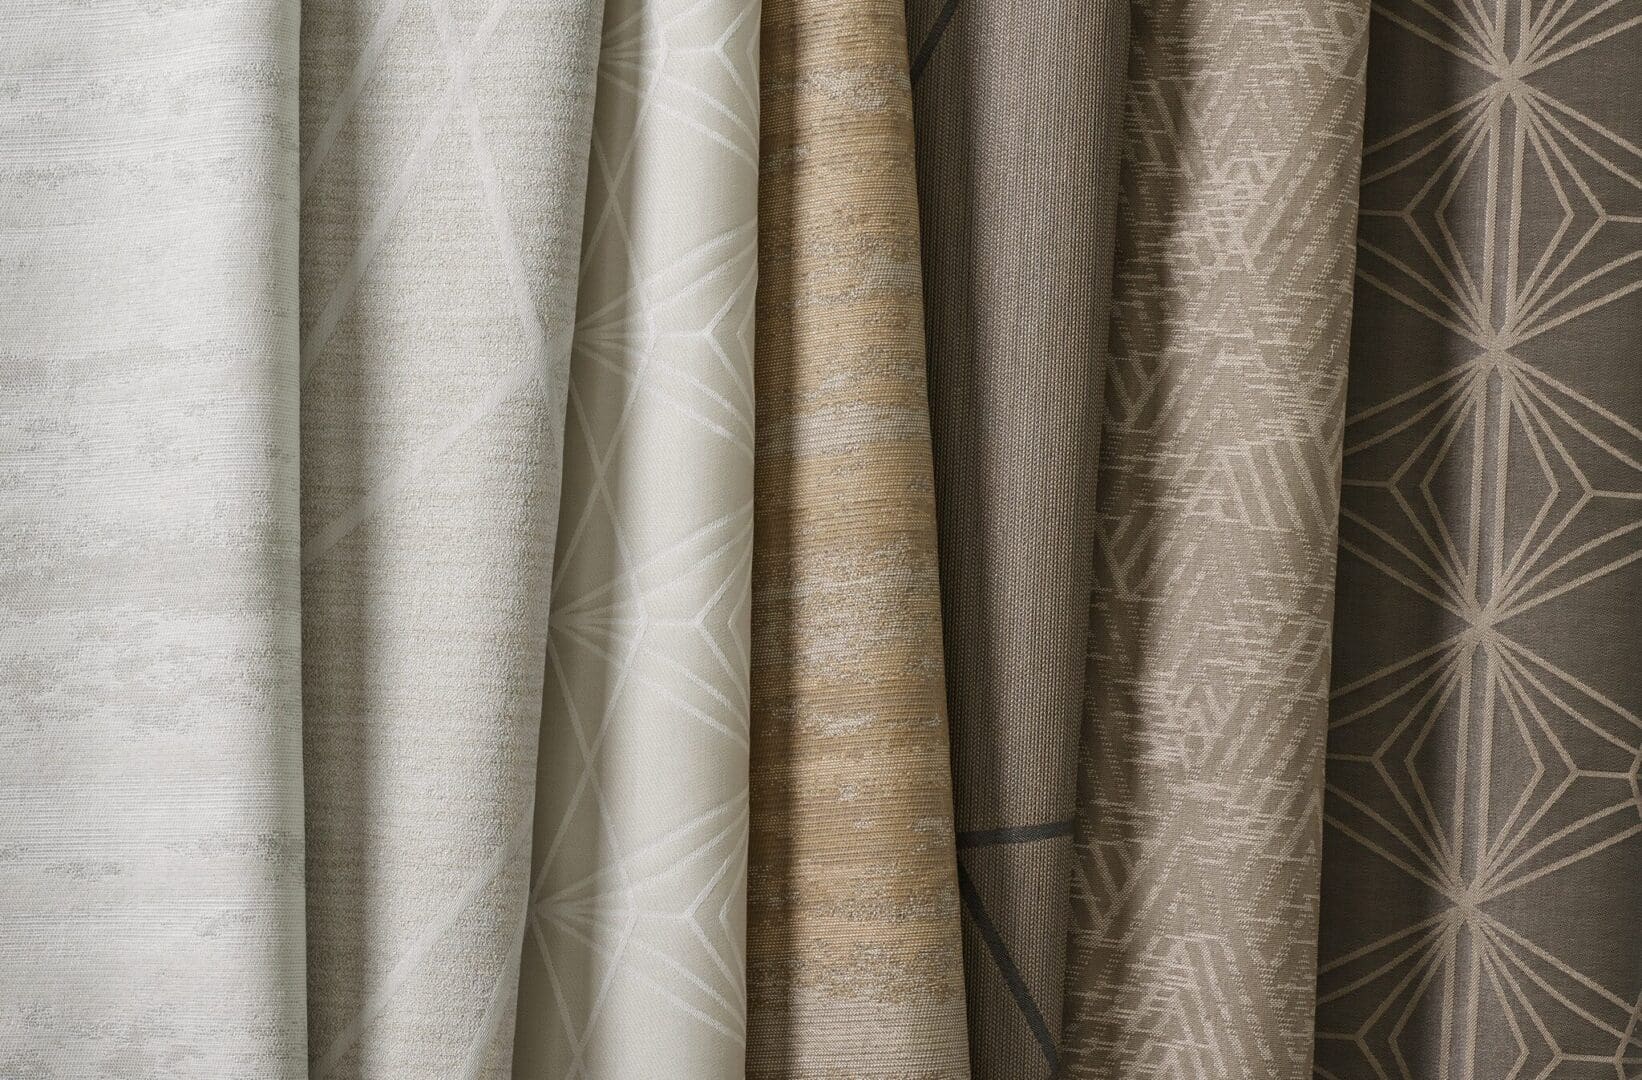 A close up of several different types of fabric.